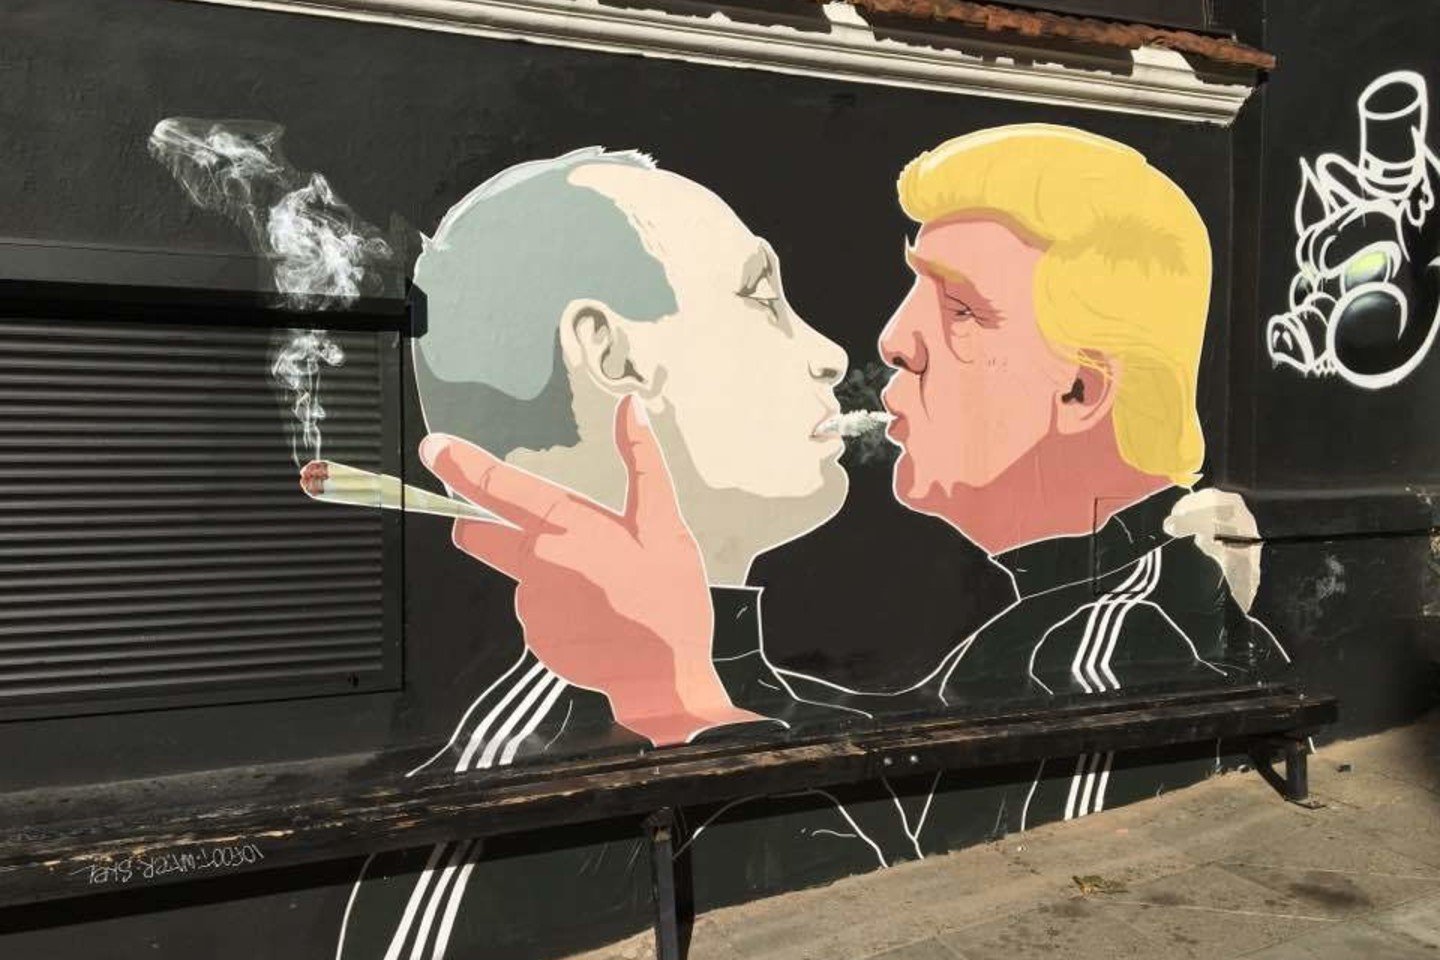 relevant photo of a mural with Putin and Trump kissing